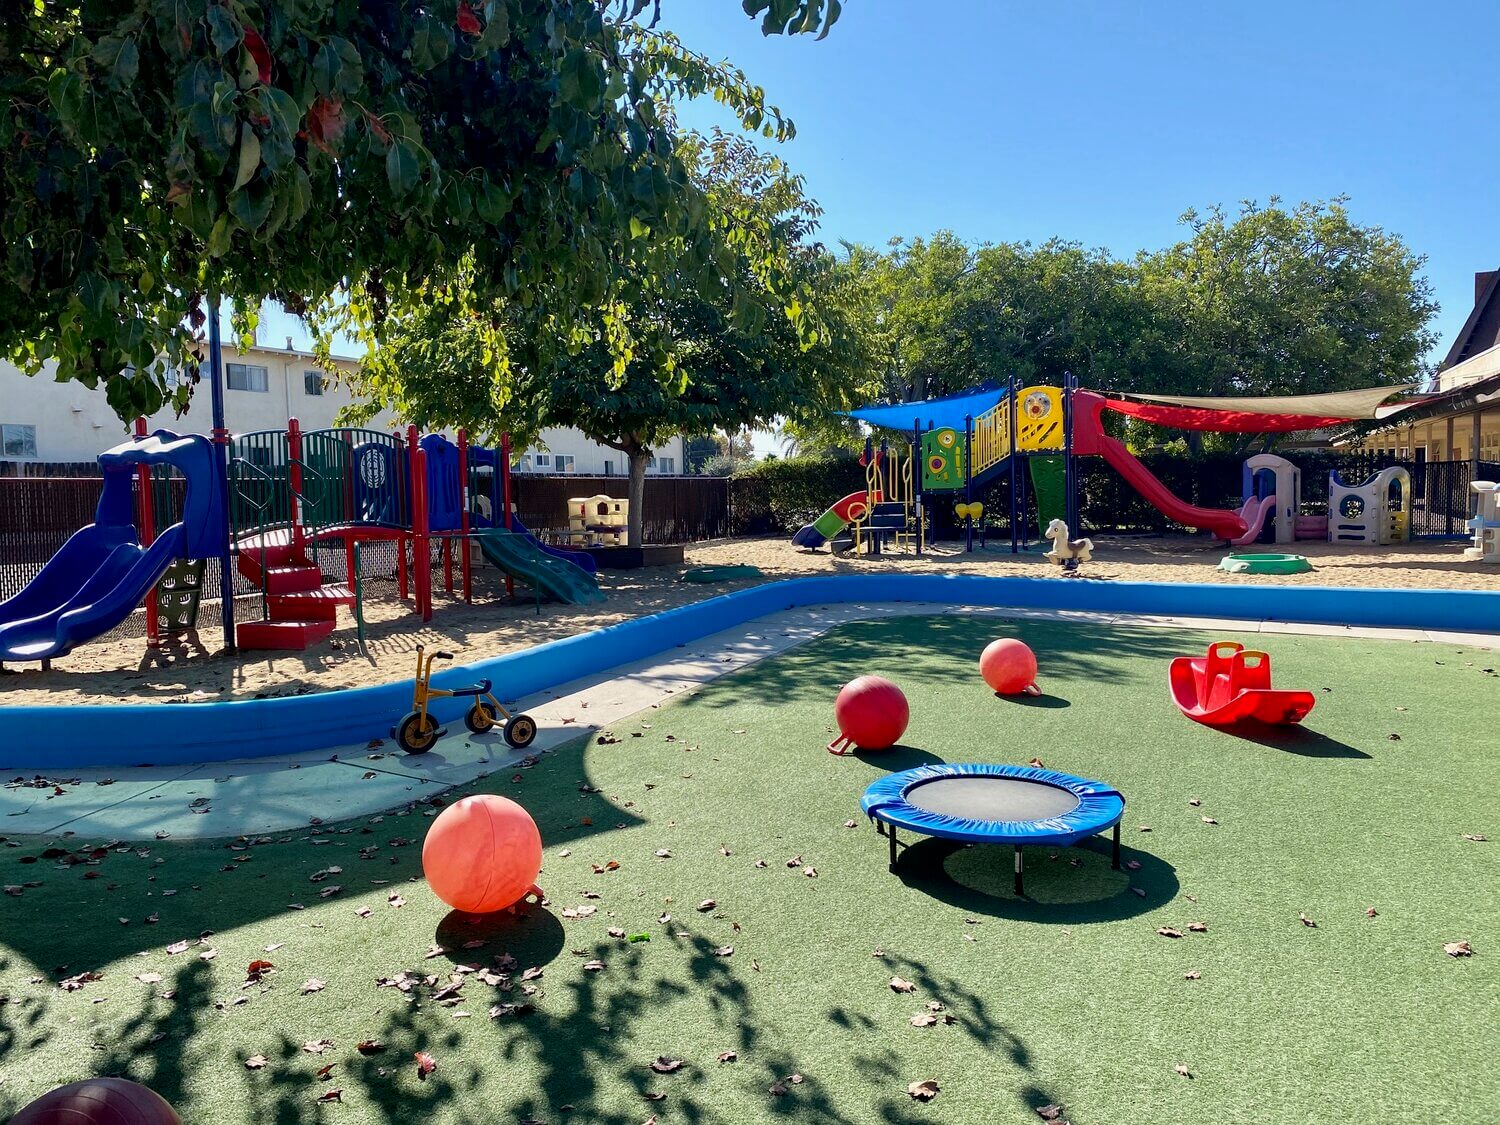 School Playgrounds Are Compared To 50 Years Ago